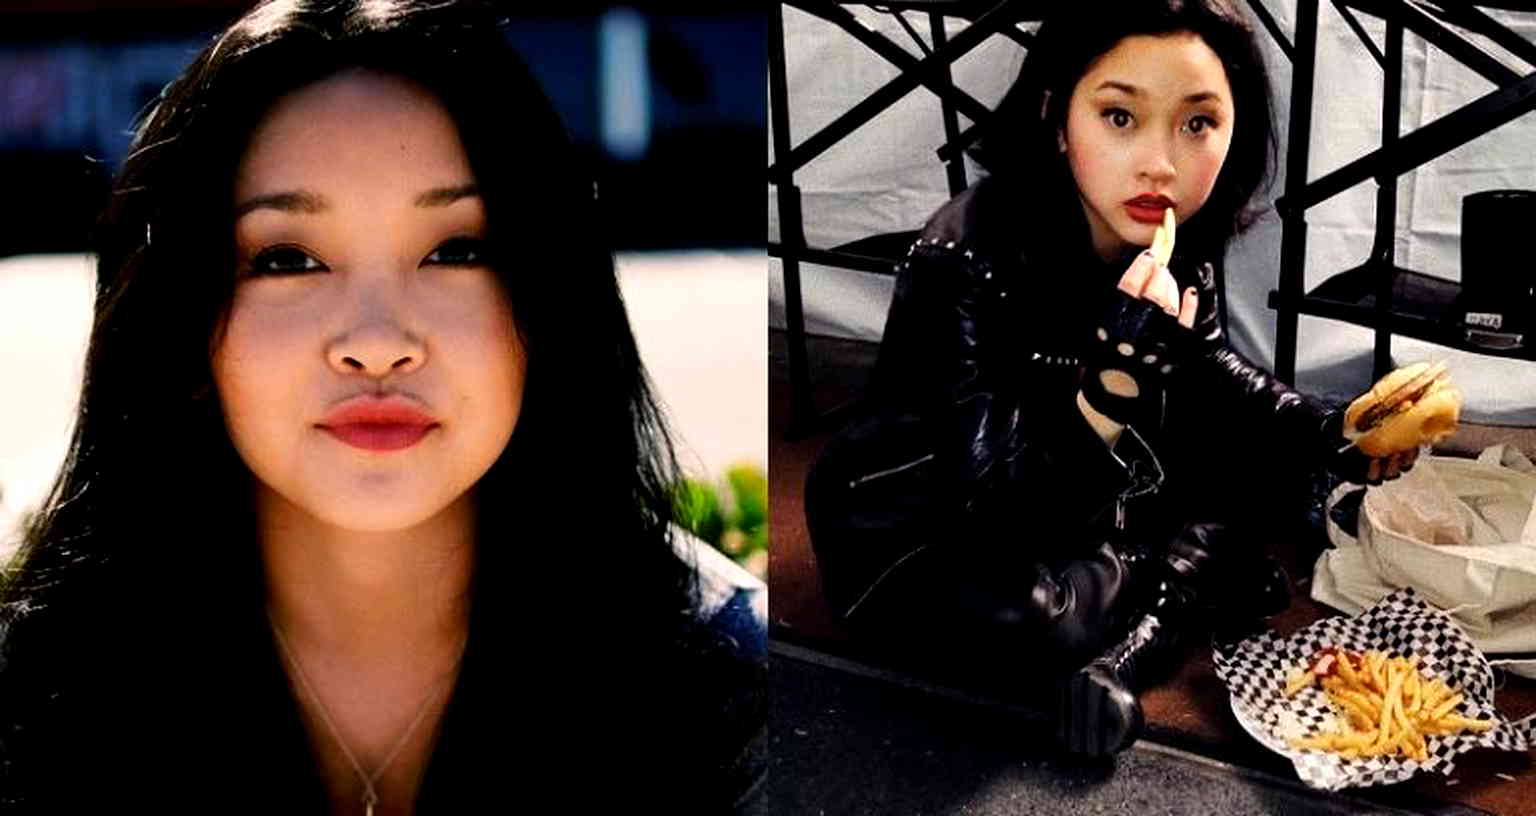 Lana Condor Opens Up About Her Struggles With Eating Disorders and Body Image